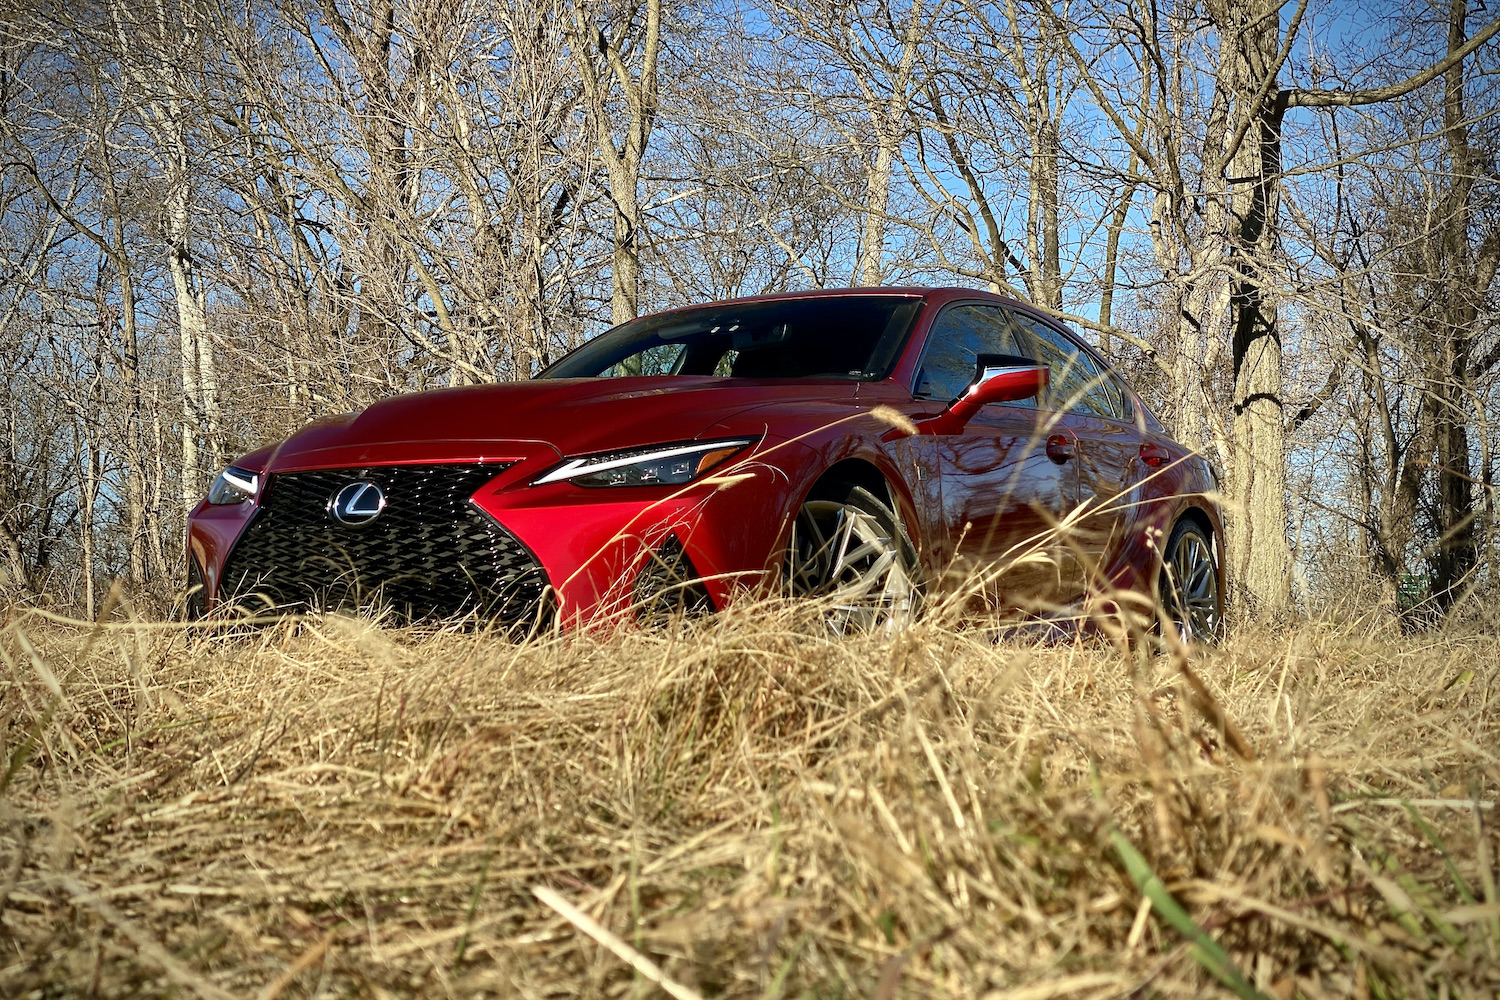 Lexus IS 500 front end from driver's side angle in a grassy field.